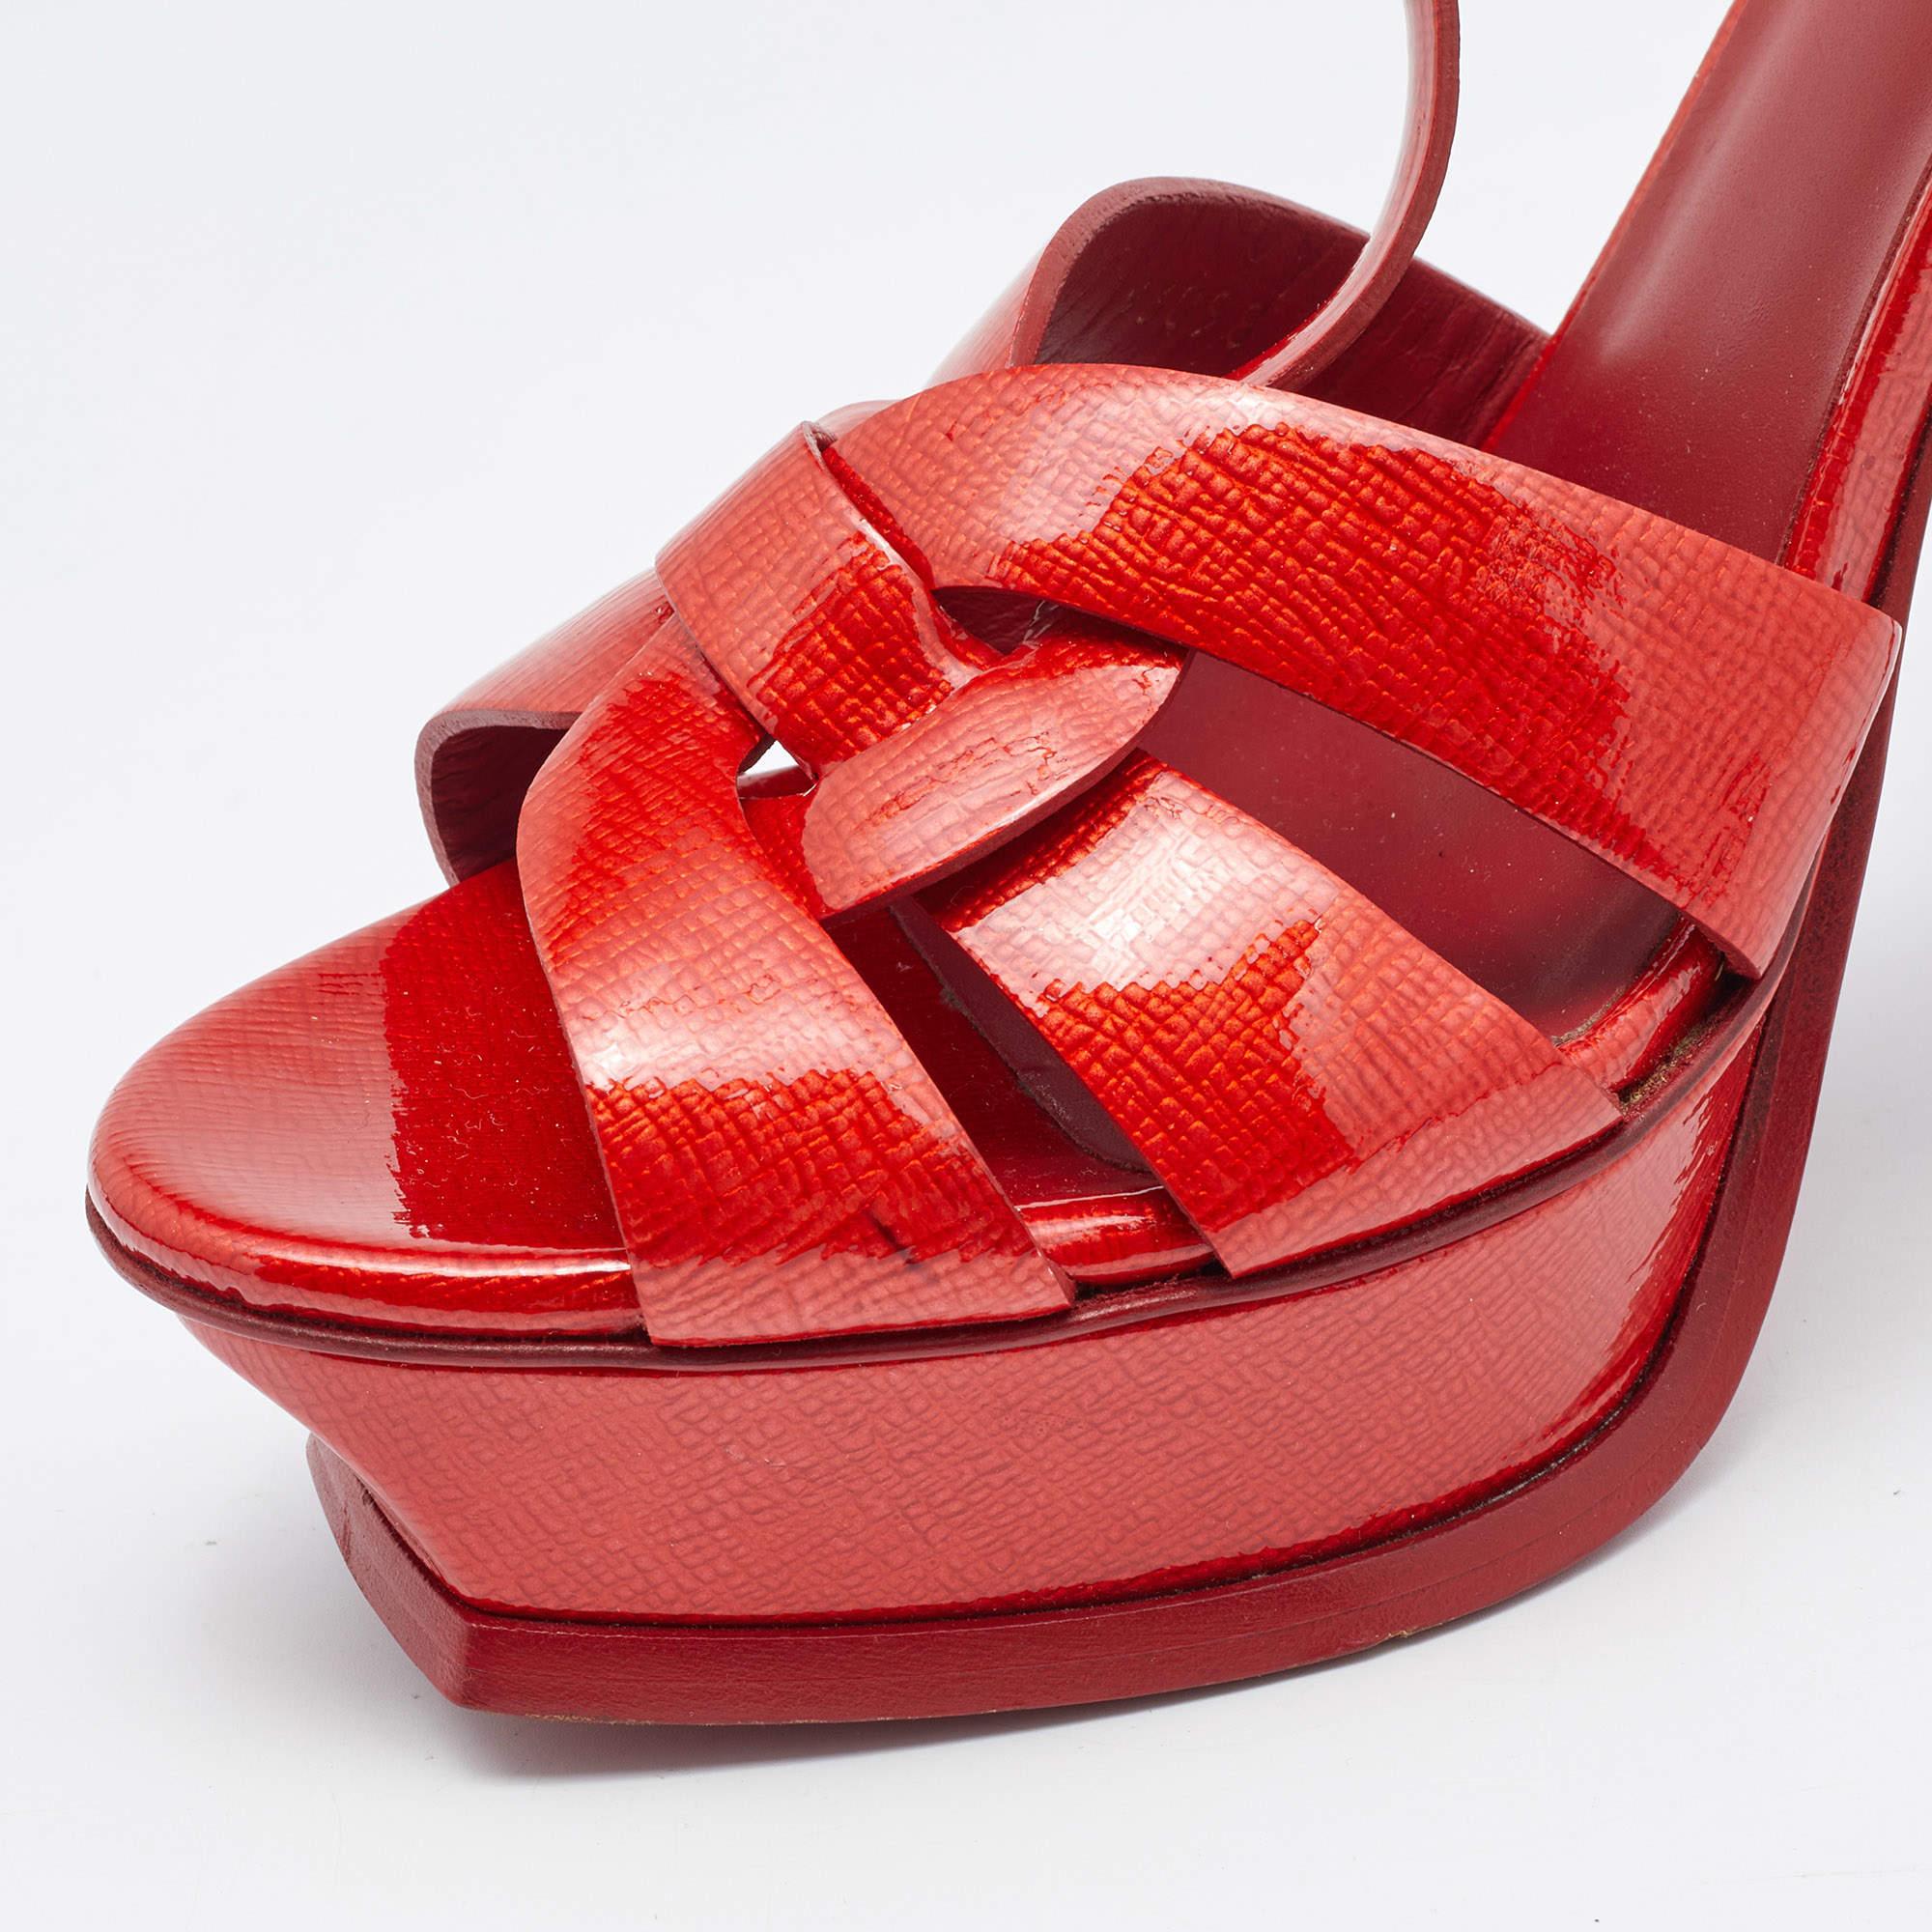 ysl red sandals